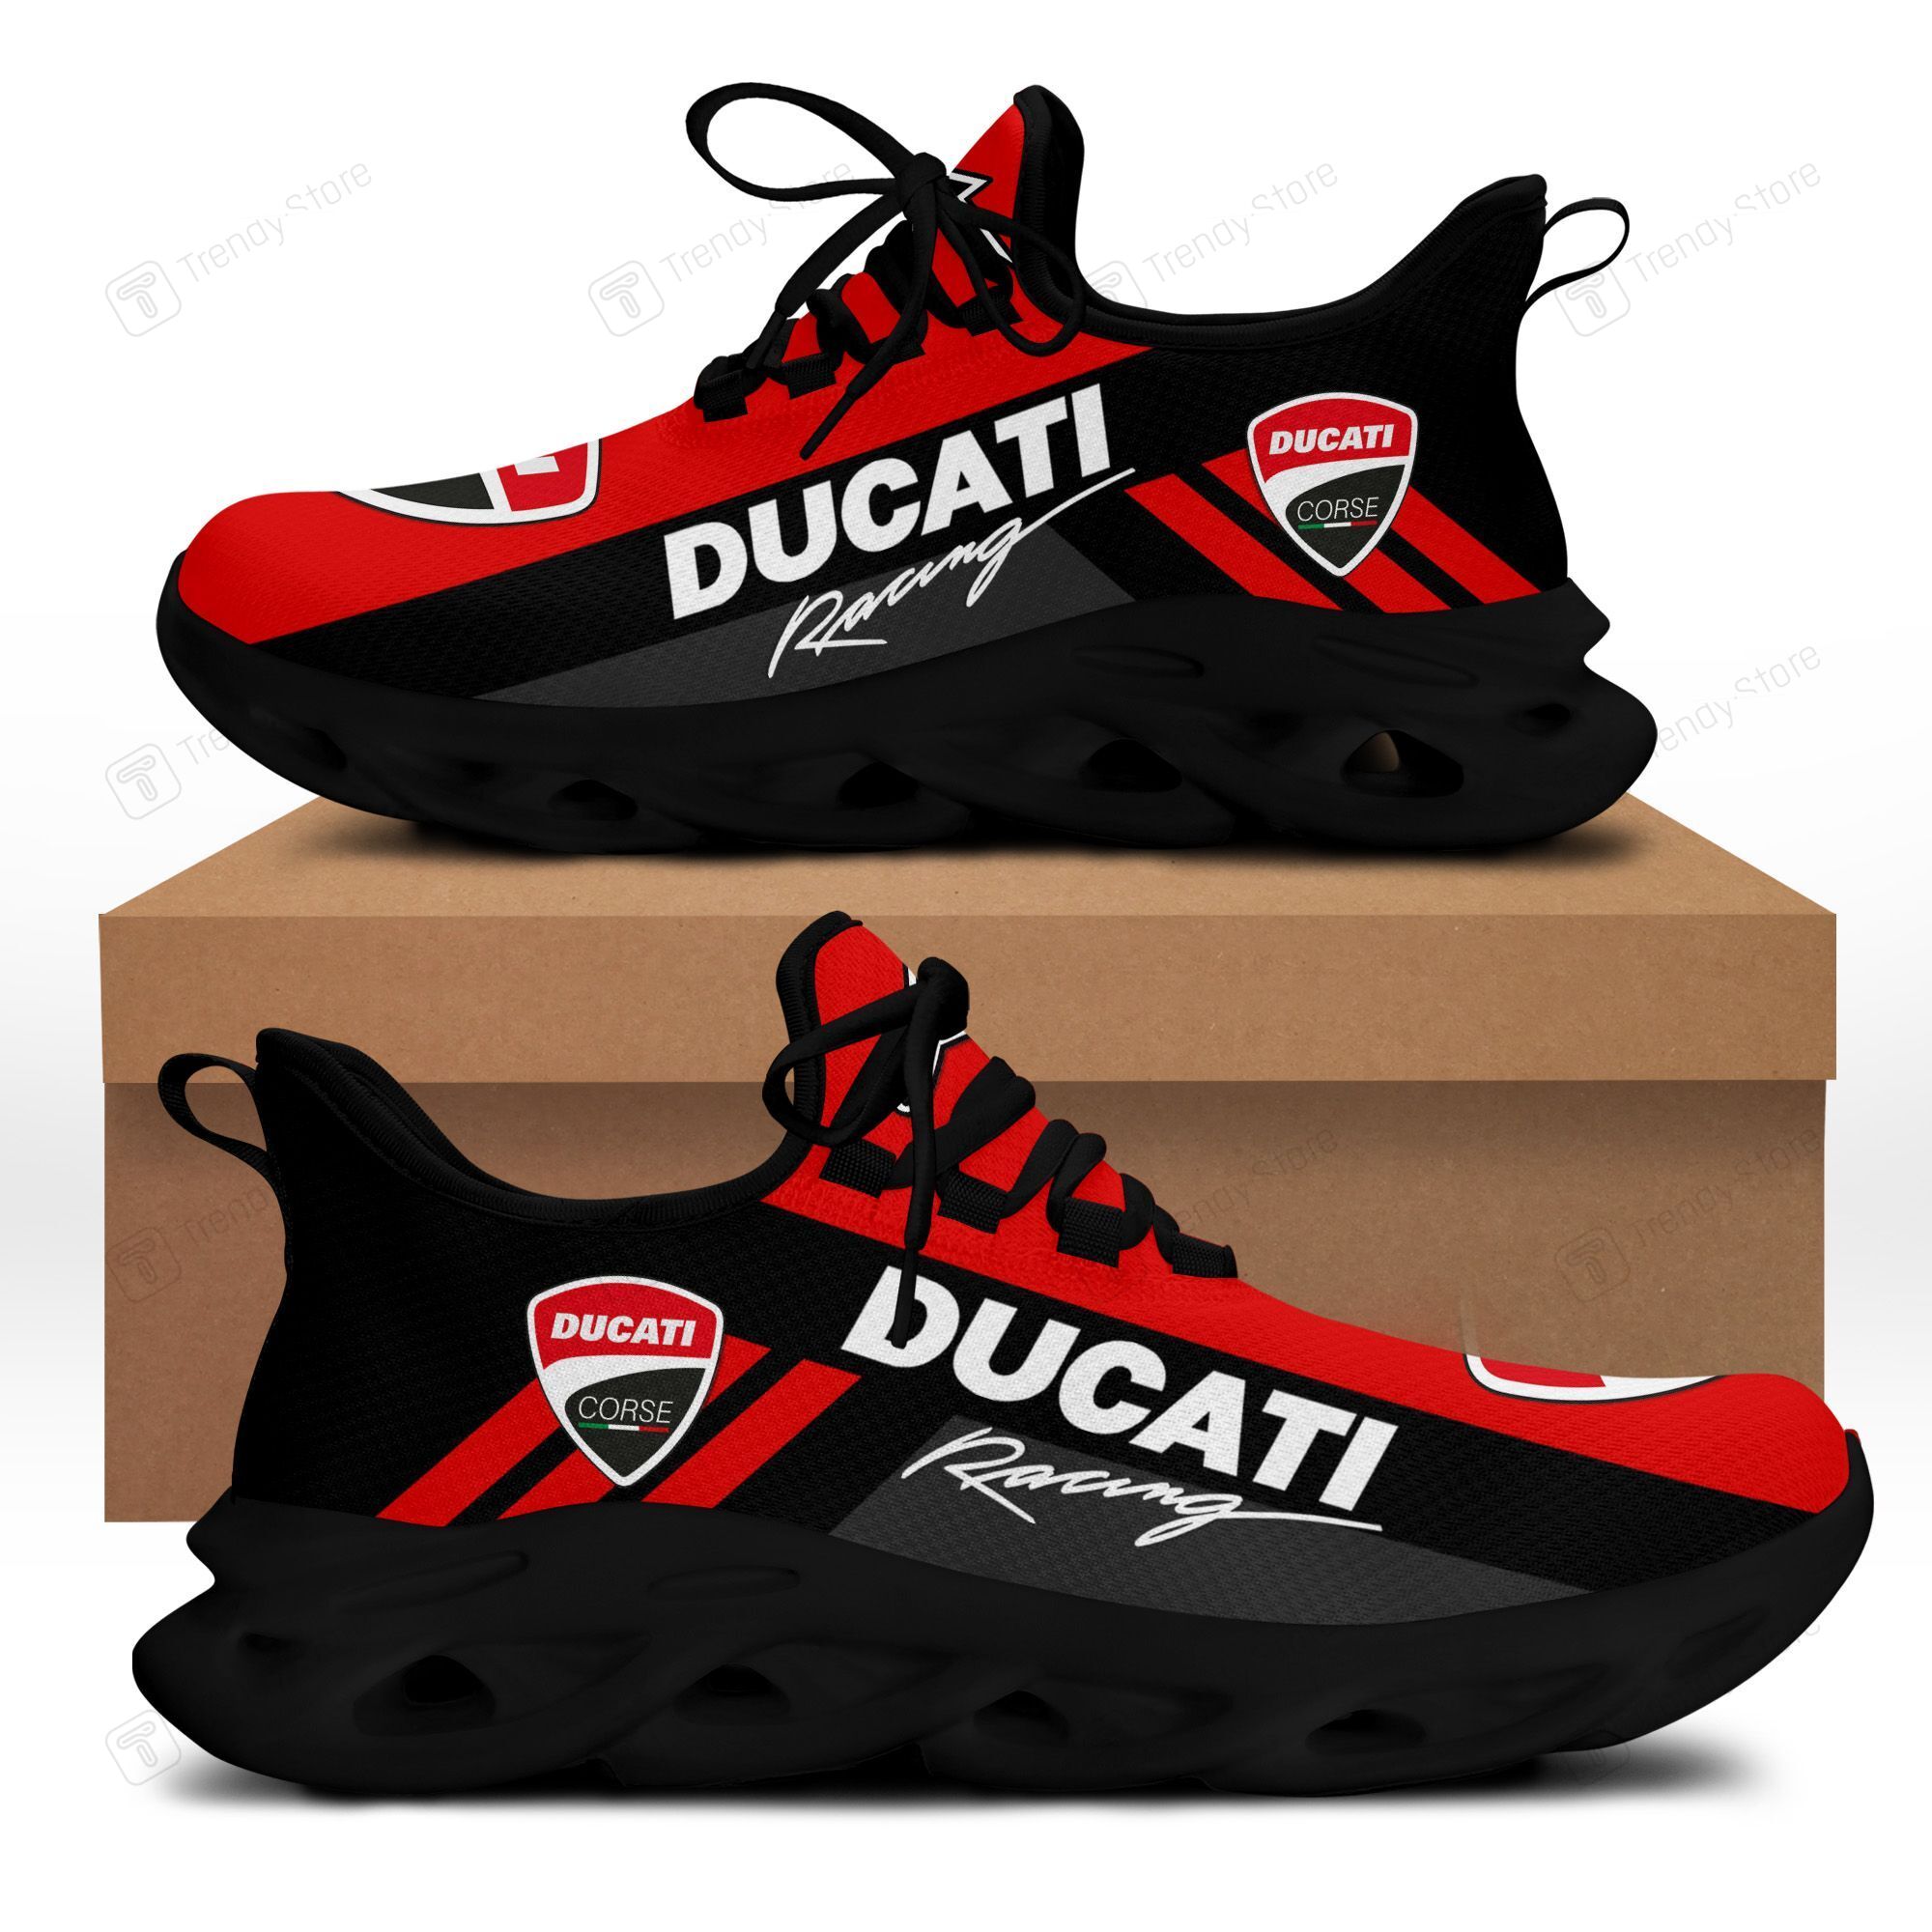 Ducati Racing Bs Running Shoes Ver 1 (Red) – Fashionspicex Shop